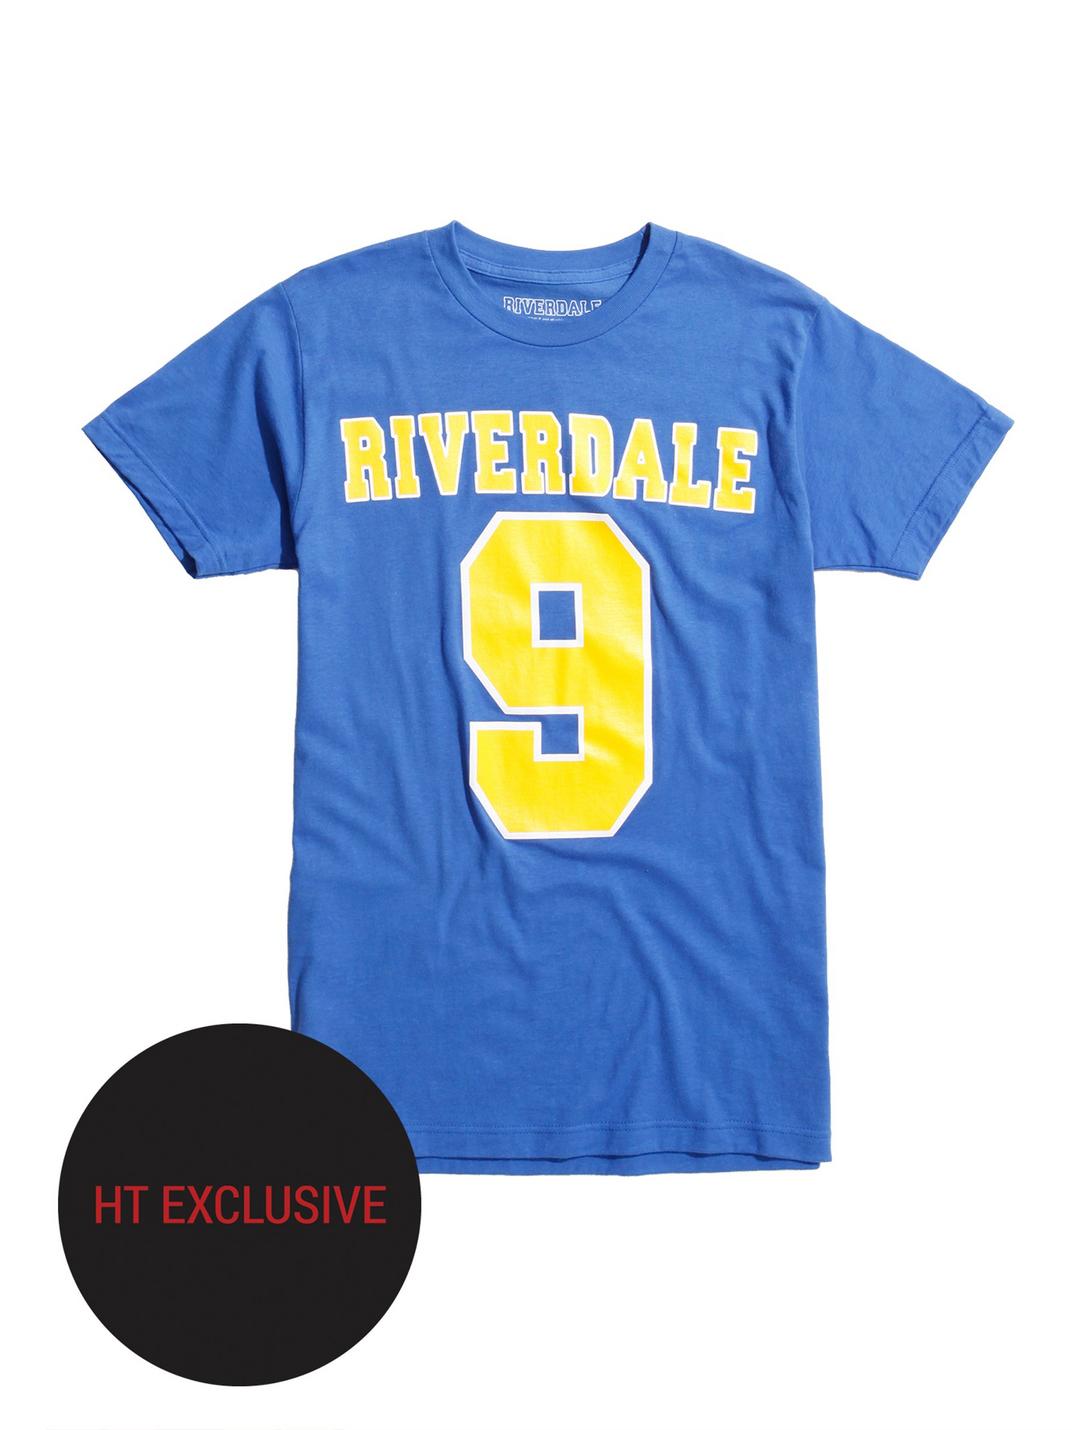 Riverdale Jersey T-Shirt Hot Topic Exclusive, BLUE, hi-res